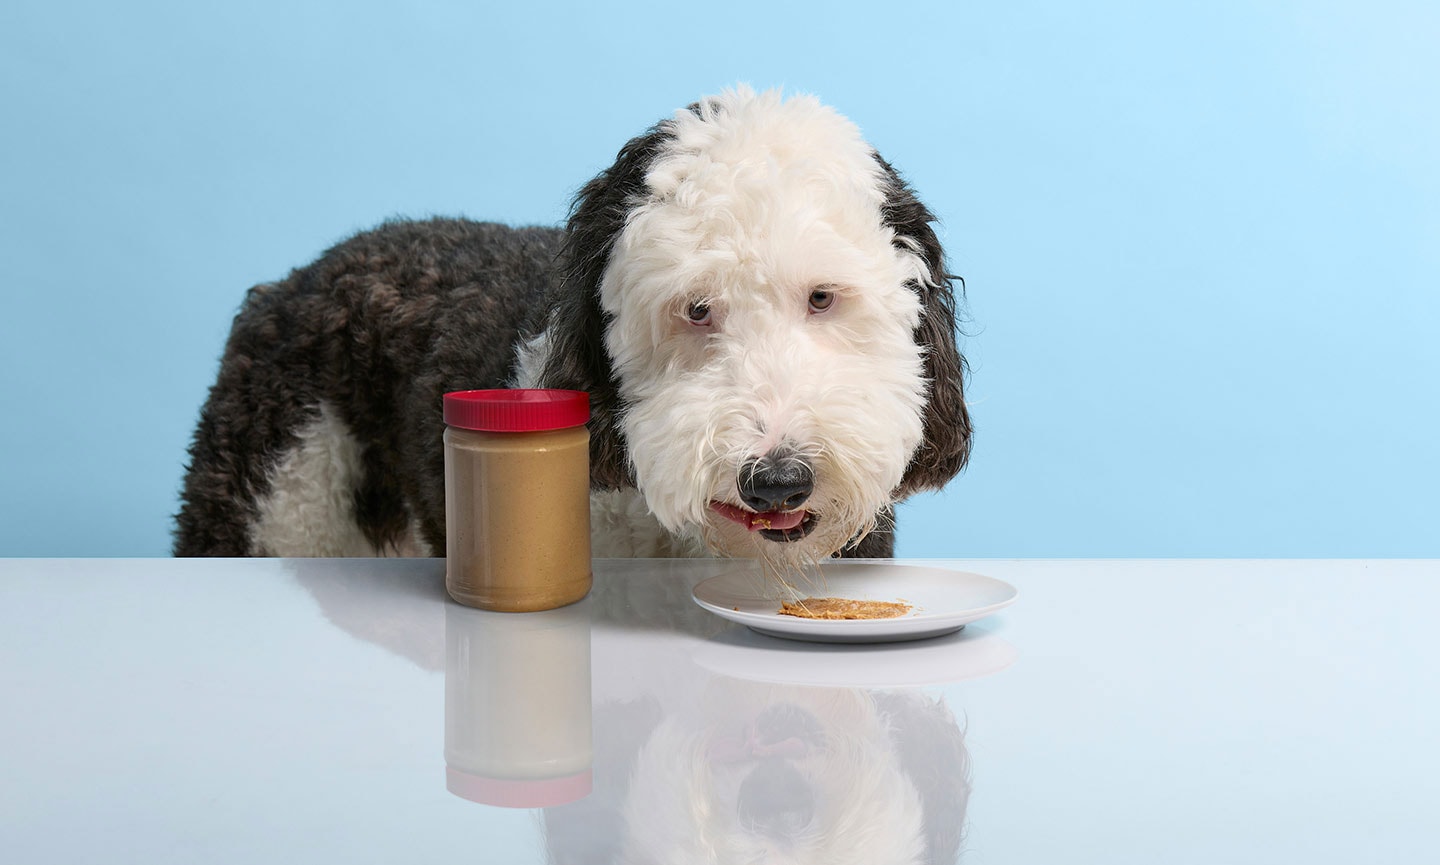 Can Dogs Eat Butter? What to Know About Dogs and Butter